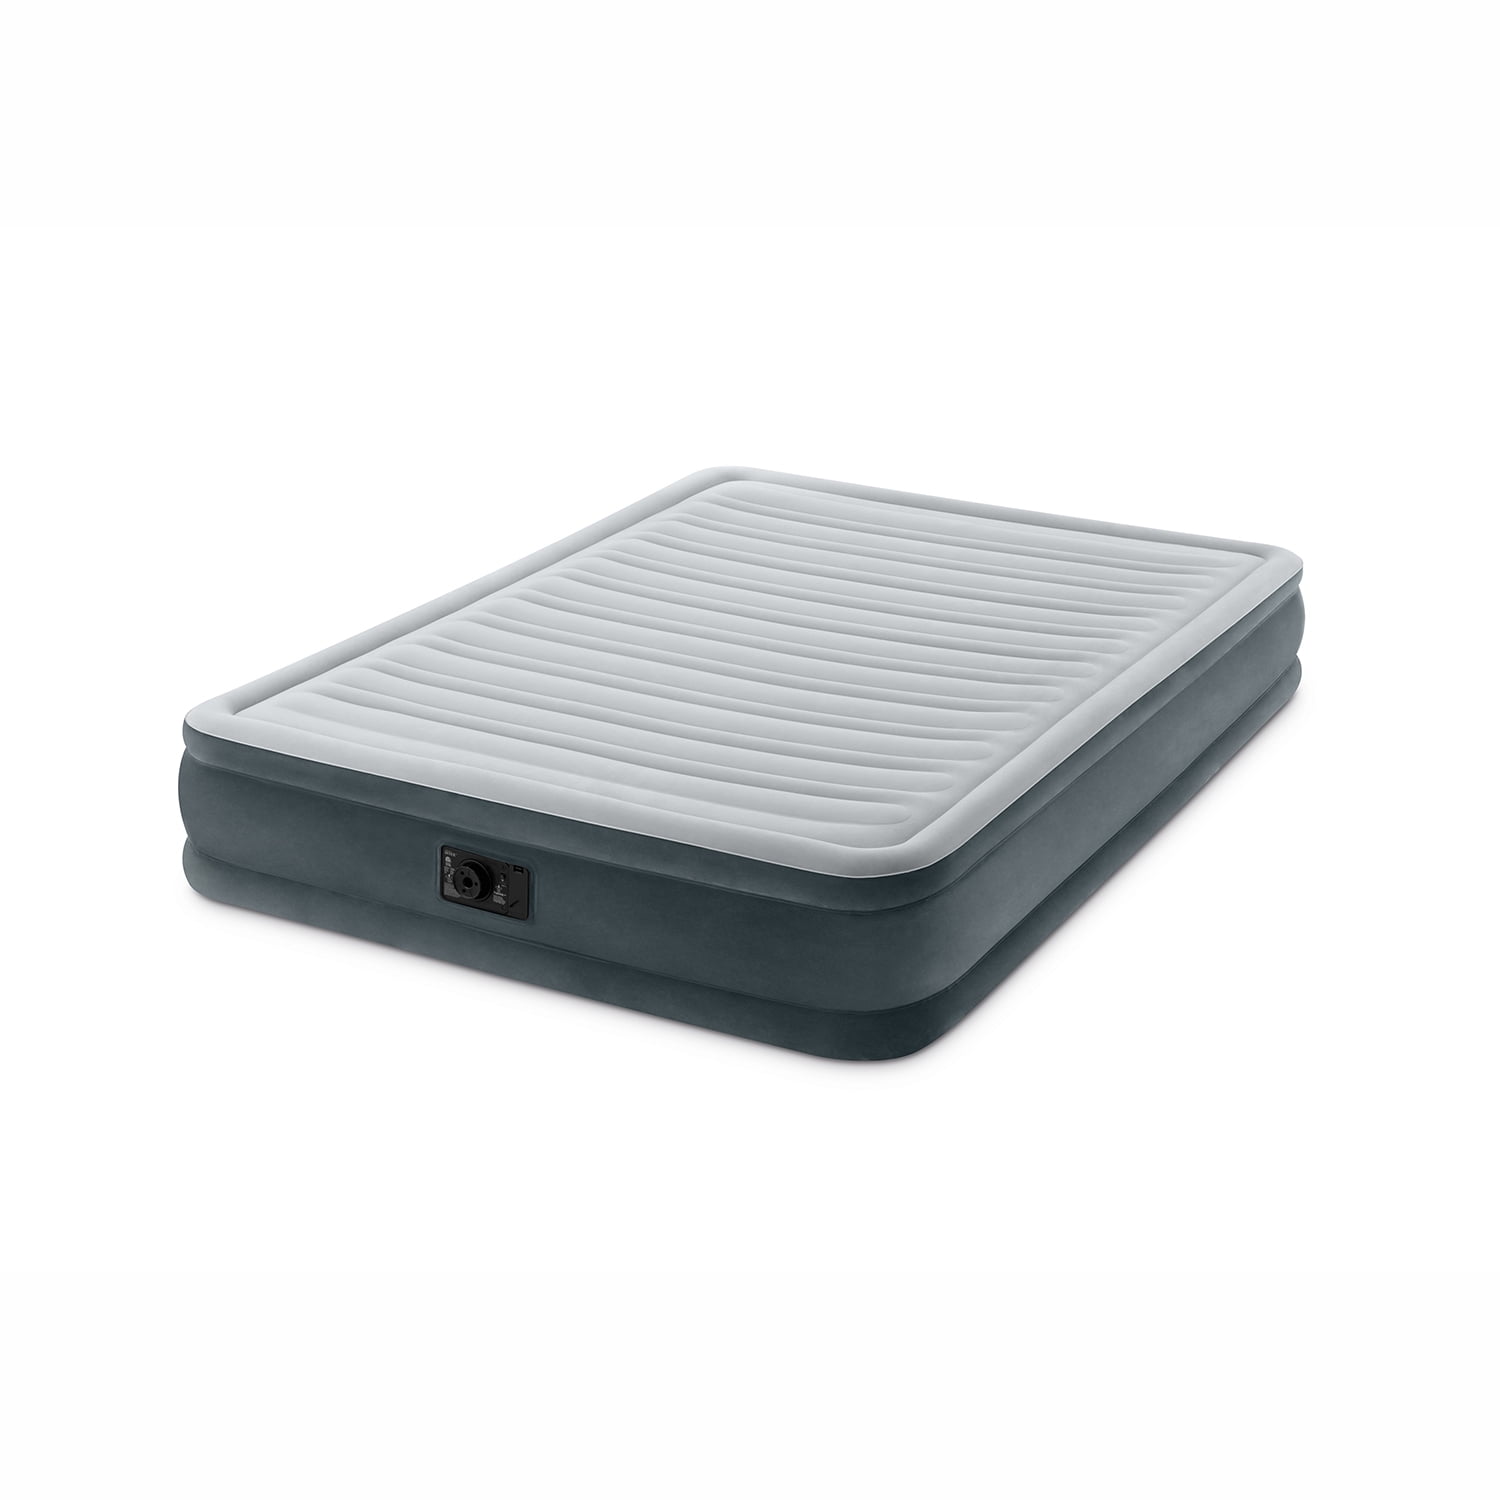 Intex Dura-Beam Comfort Plush Mid Rise Air Bed Queen Size with built-in electric pump #67770 